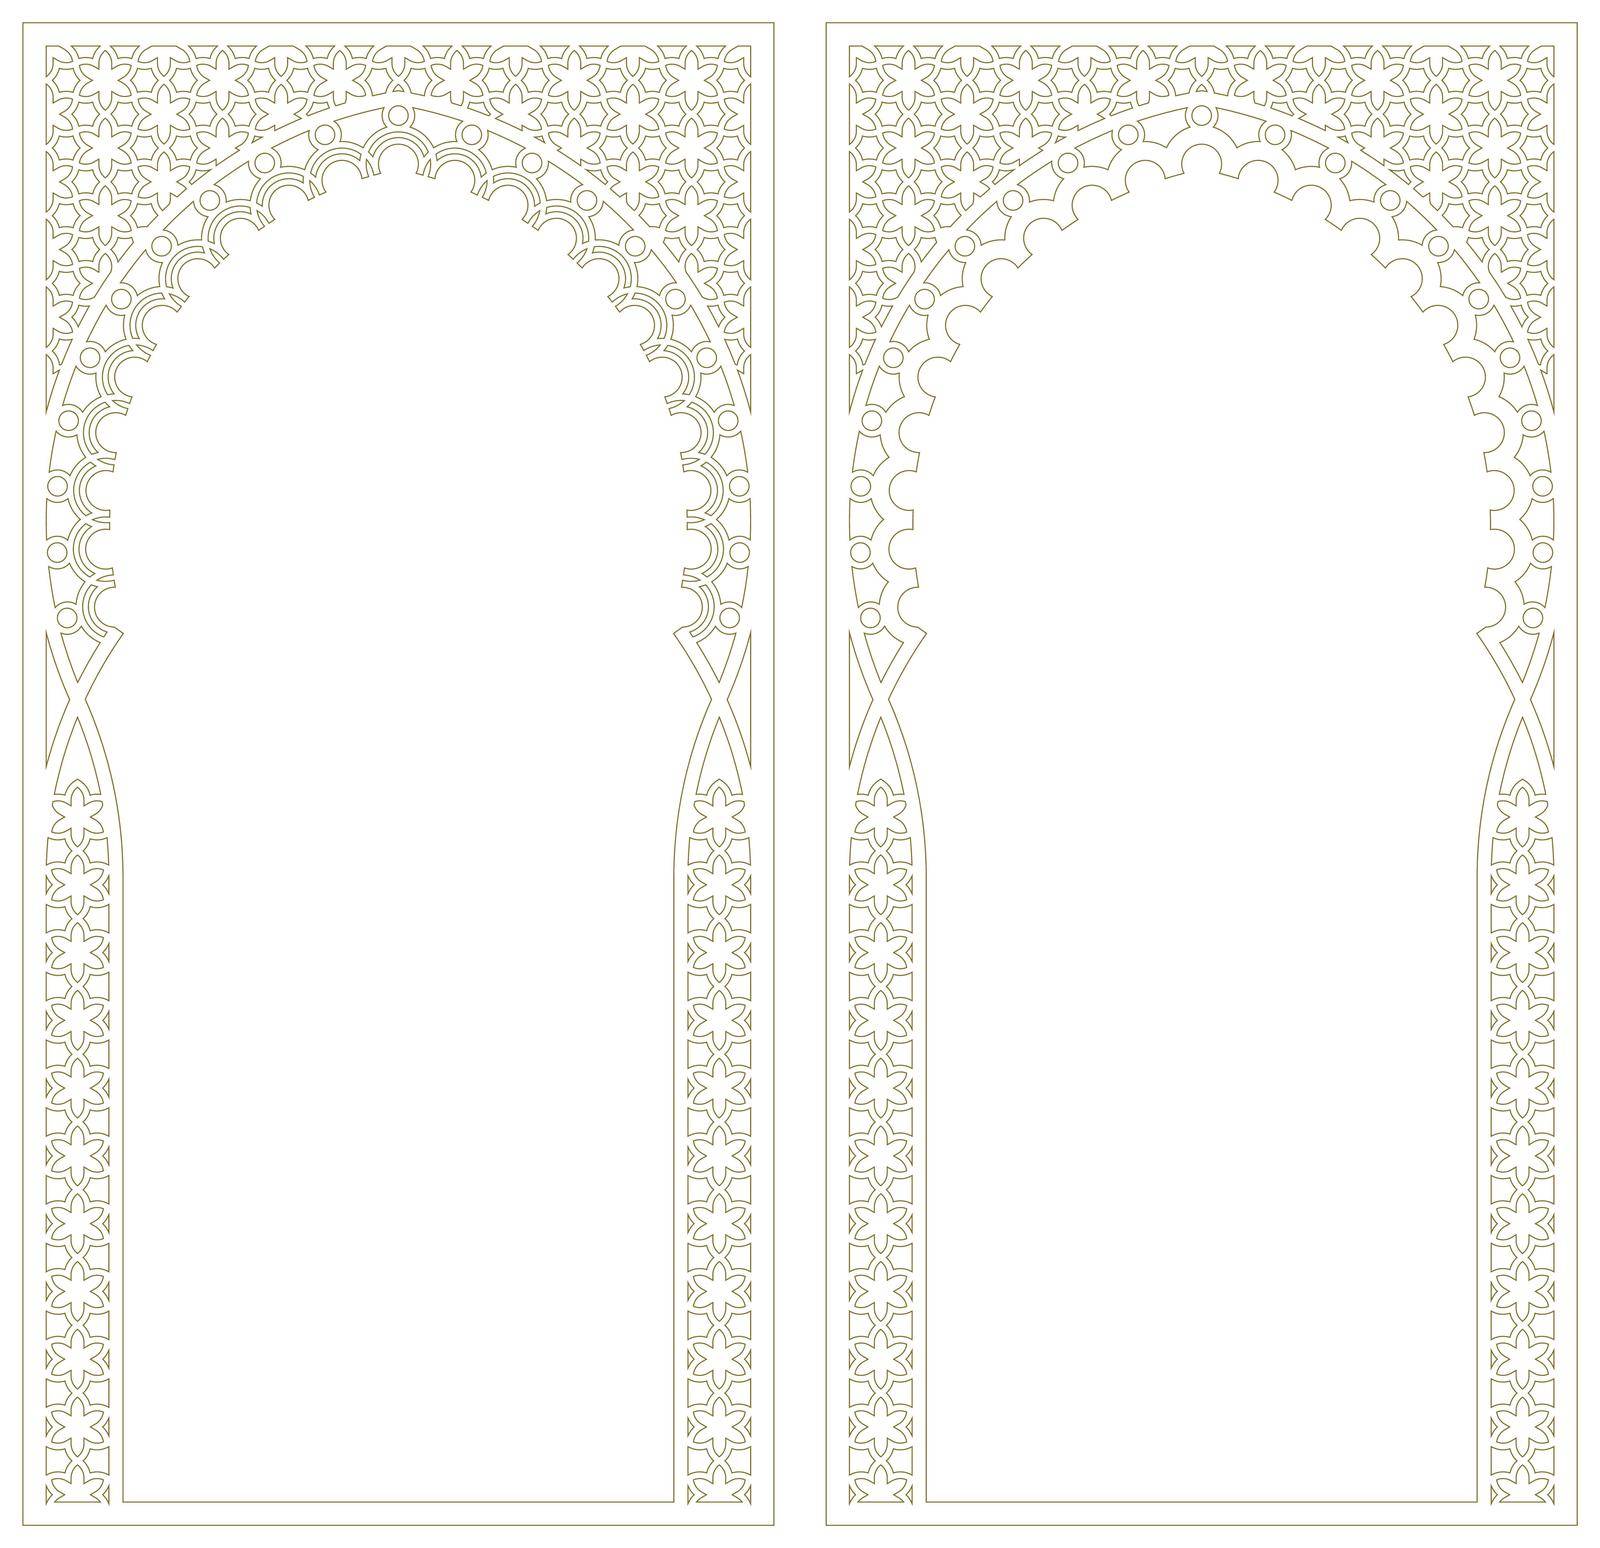 Rectangular frame with Arabic pattern and curly frame. Proportion 1x2. Contoured lines